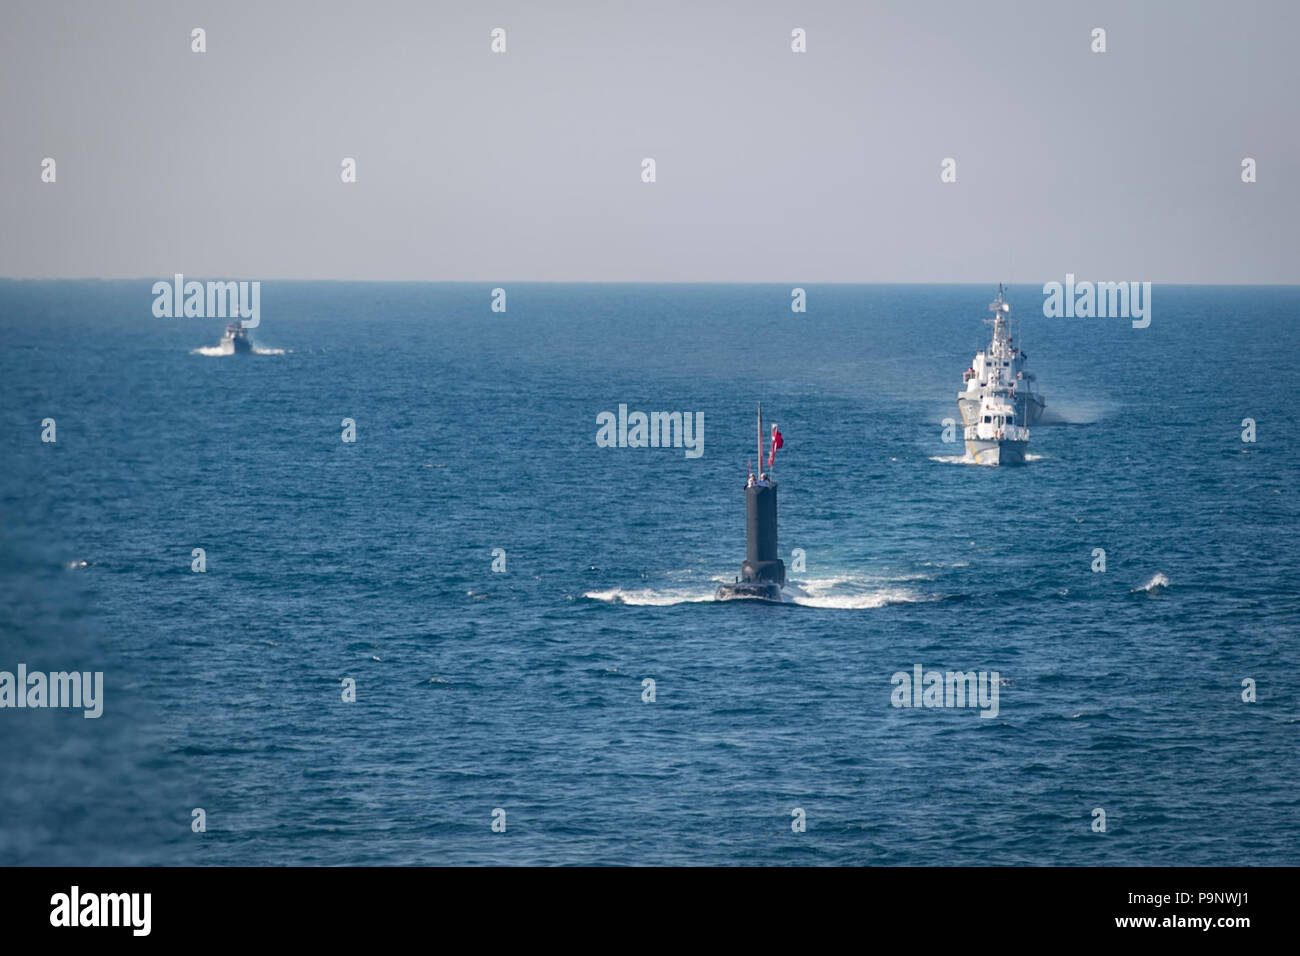 180713-N-JI086-111  BLACK SEA (July 13, 2018) Participating countries sail in formation in the Black Sea during exercise Sea Breeze 2018, July 13, 2018. Sea Breeze is a U.S. and Ukraine co-hosted multinational maritime exercise held in the Black Sea and is designed to enhance interoperability of participating nations and strengthen maritime security within the region. (U.S. Navy photo by Mass Communication Specialist 2nd Class Ford Williams/Released) Stock Photo